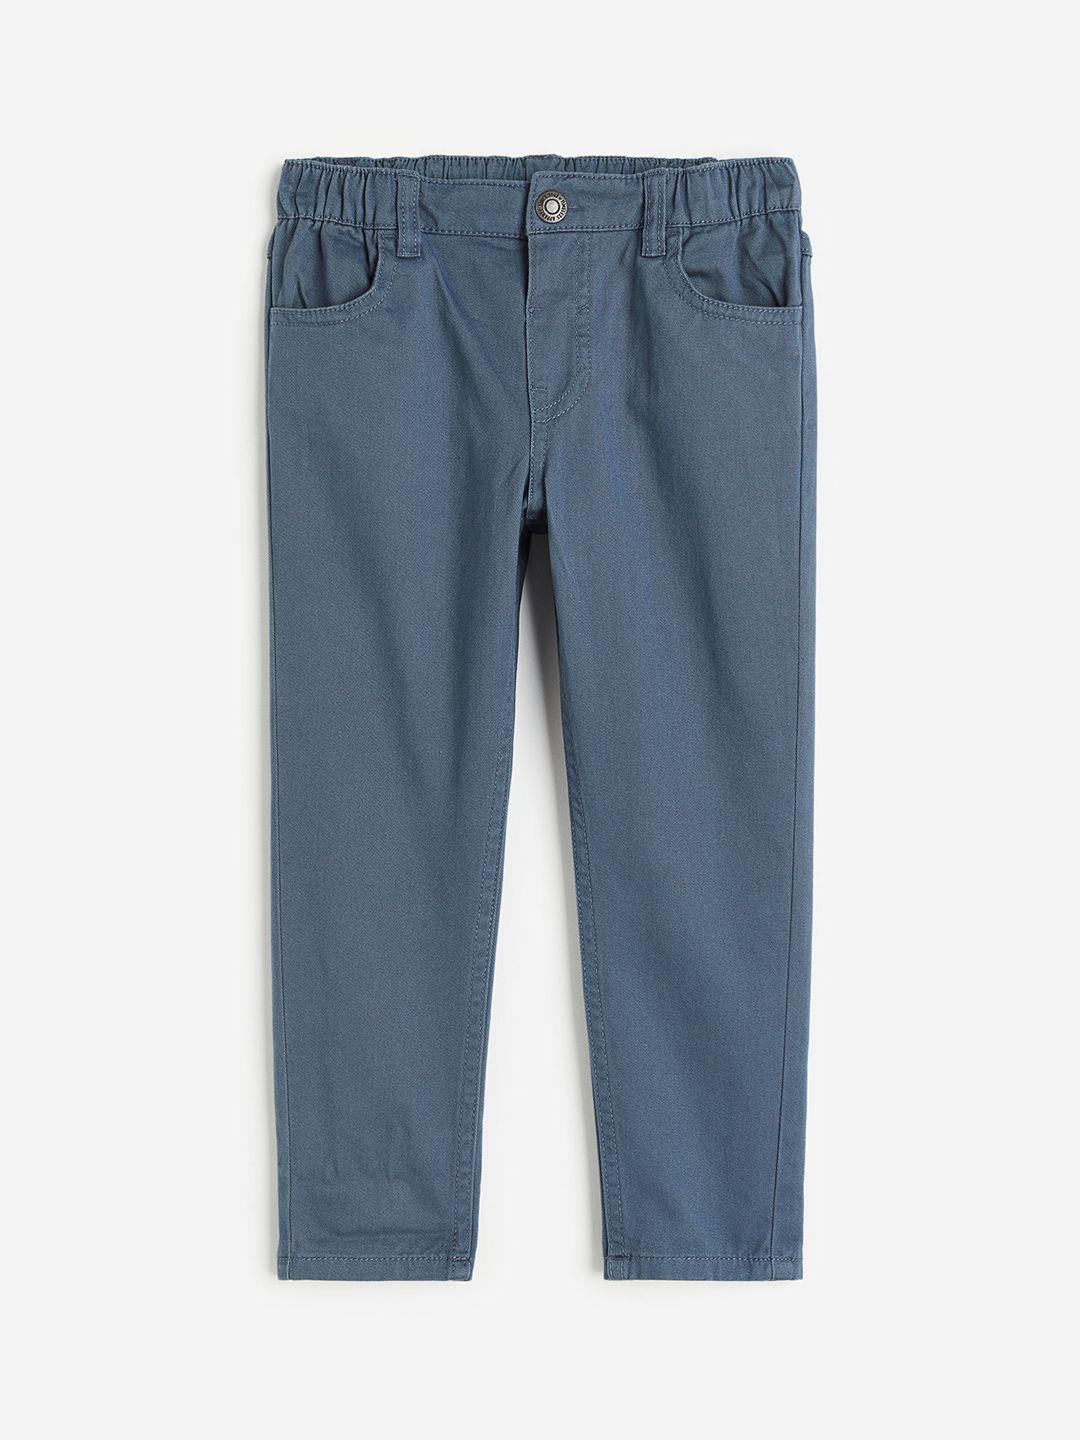 H&M Boys Relaxed Tapered Fit Trousers